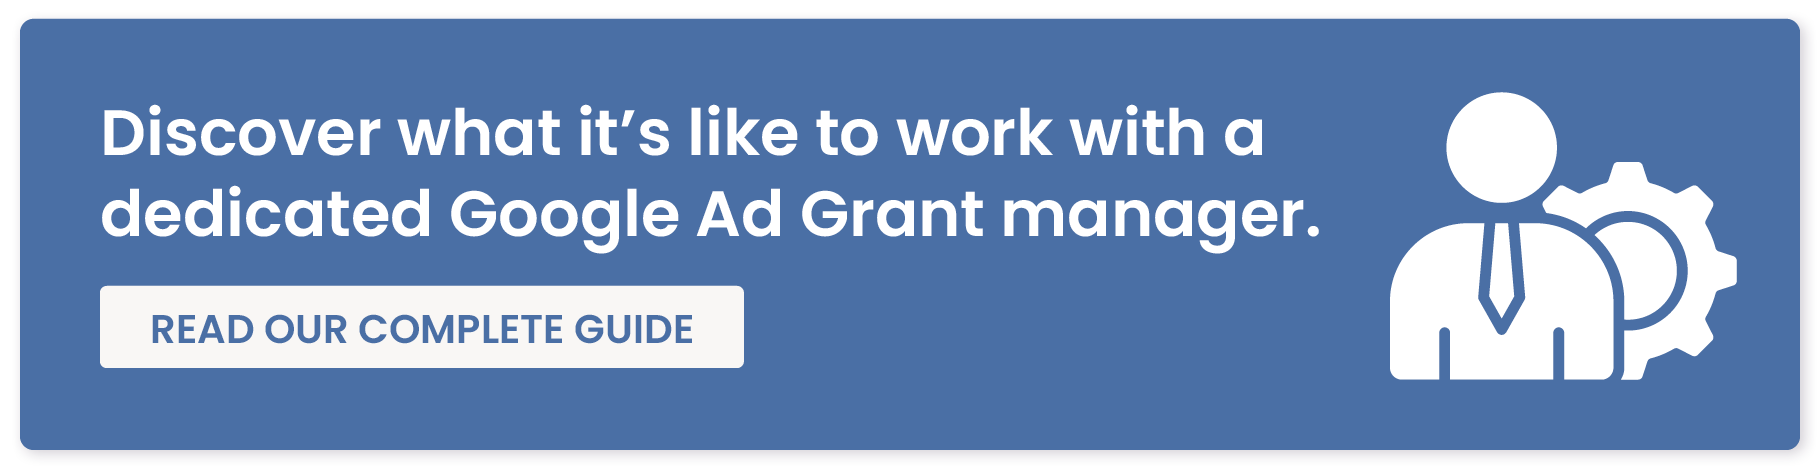 Discover what it’s like to work with a dedicated Google Ad Grant manager. Read Our Complete Guide.